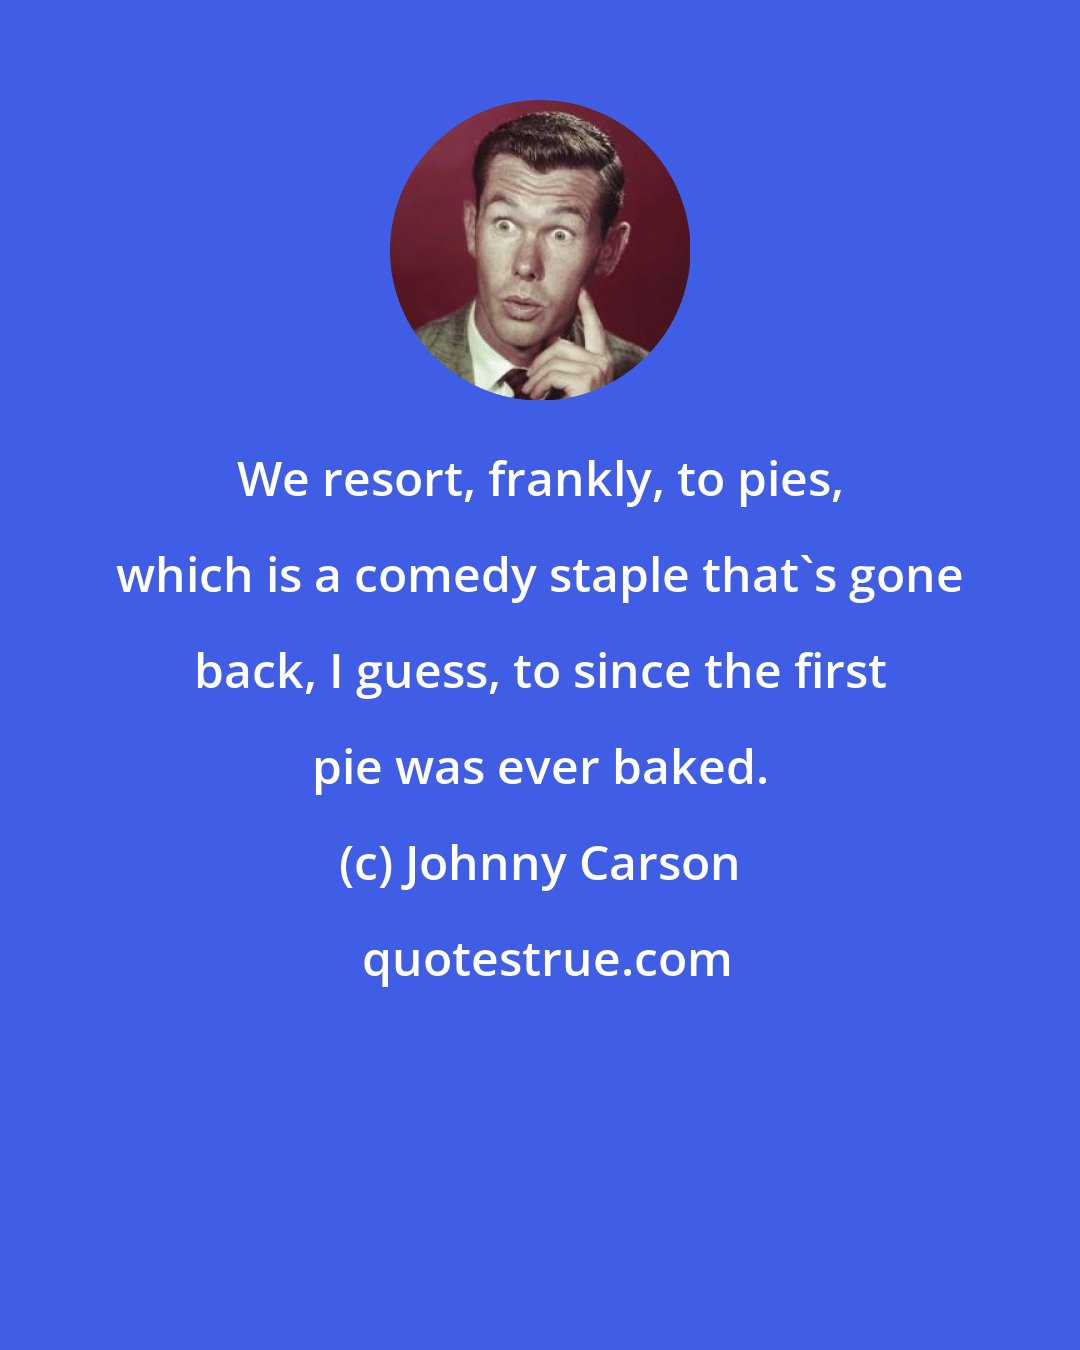 Johnny Carson: We resort, frankly, to pies, which is a comedy staple that's gone back, I guess, to since the first pie was ever baked.